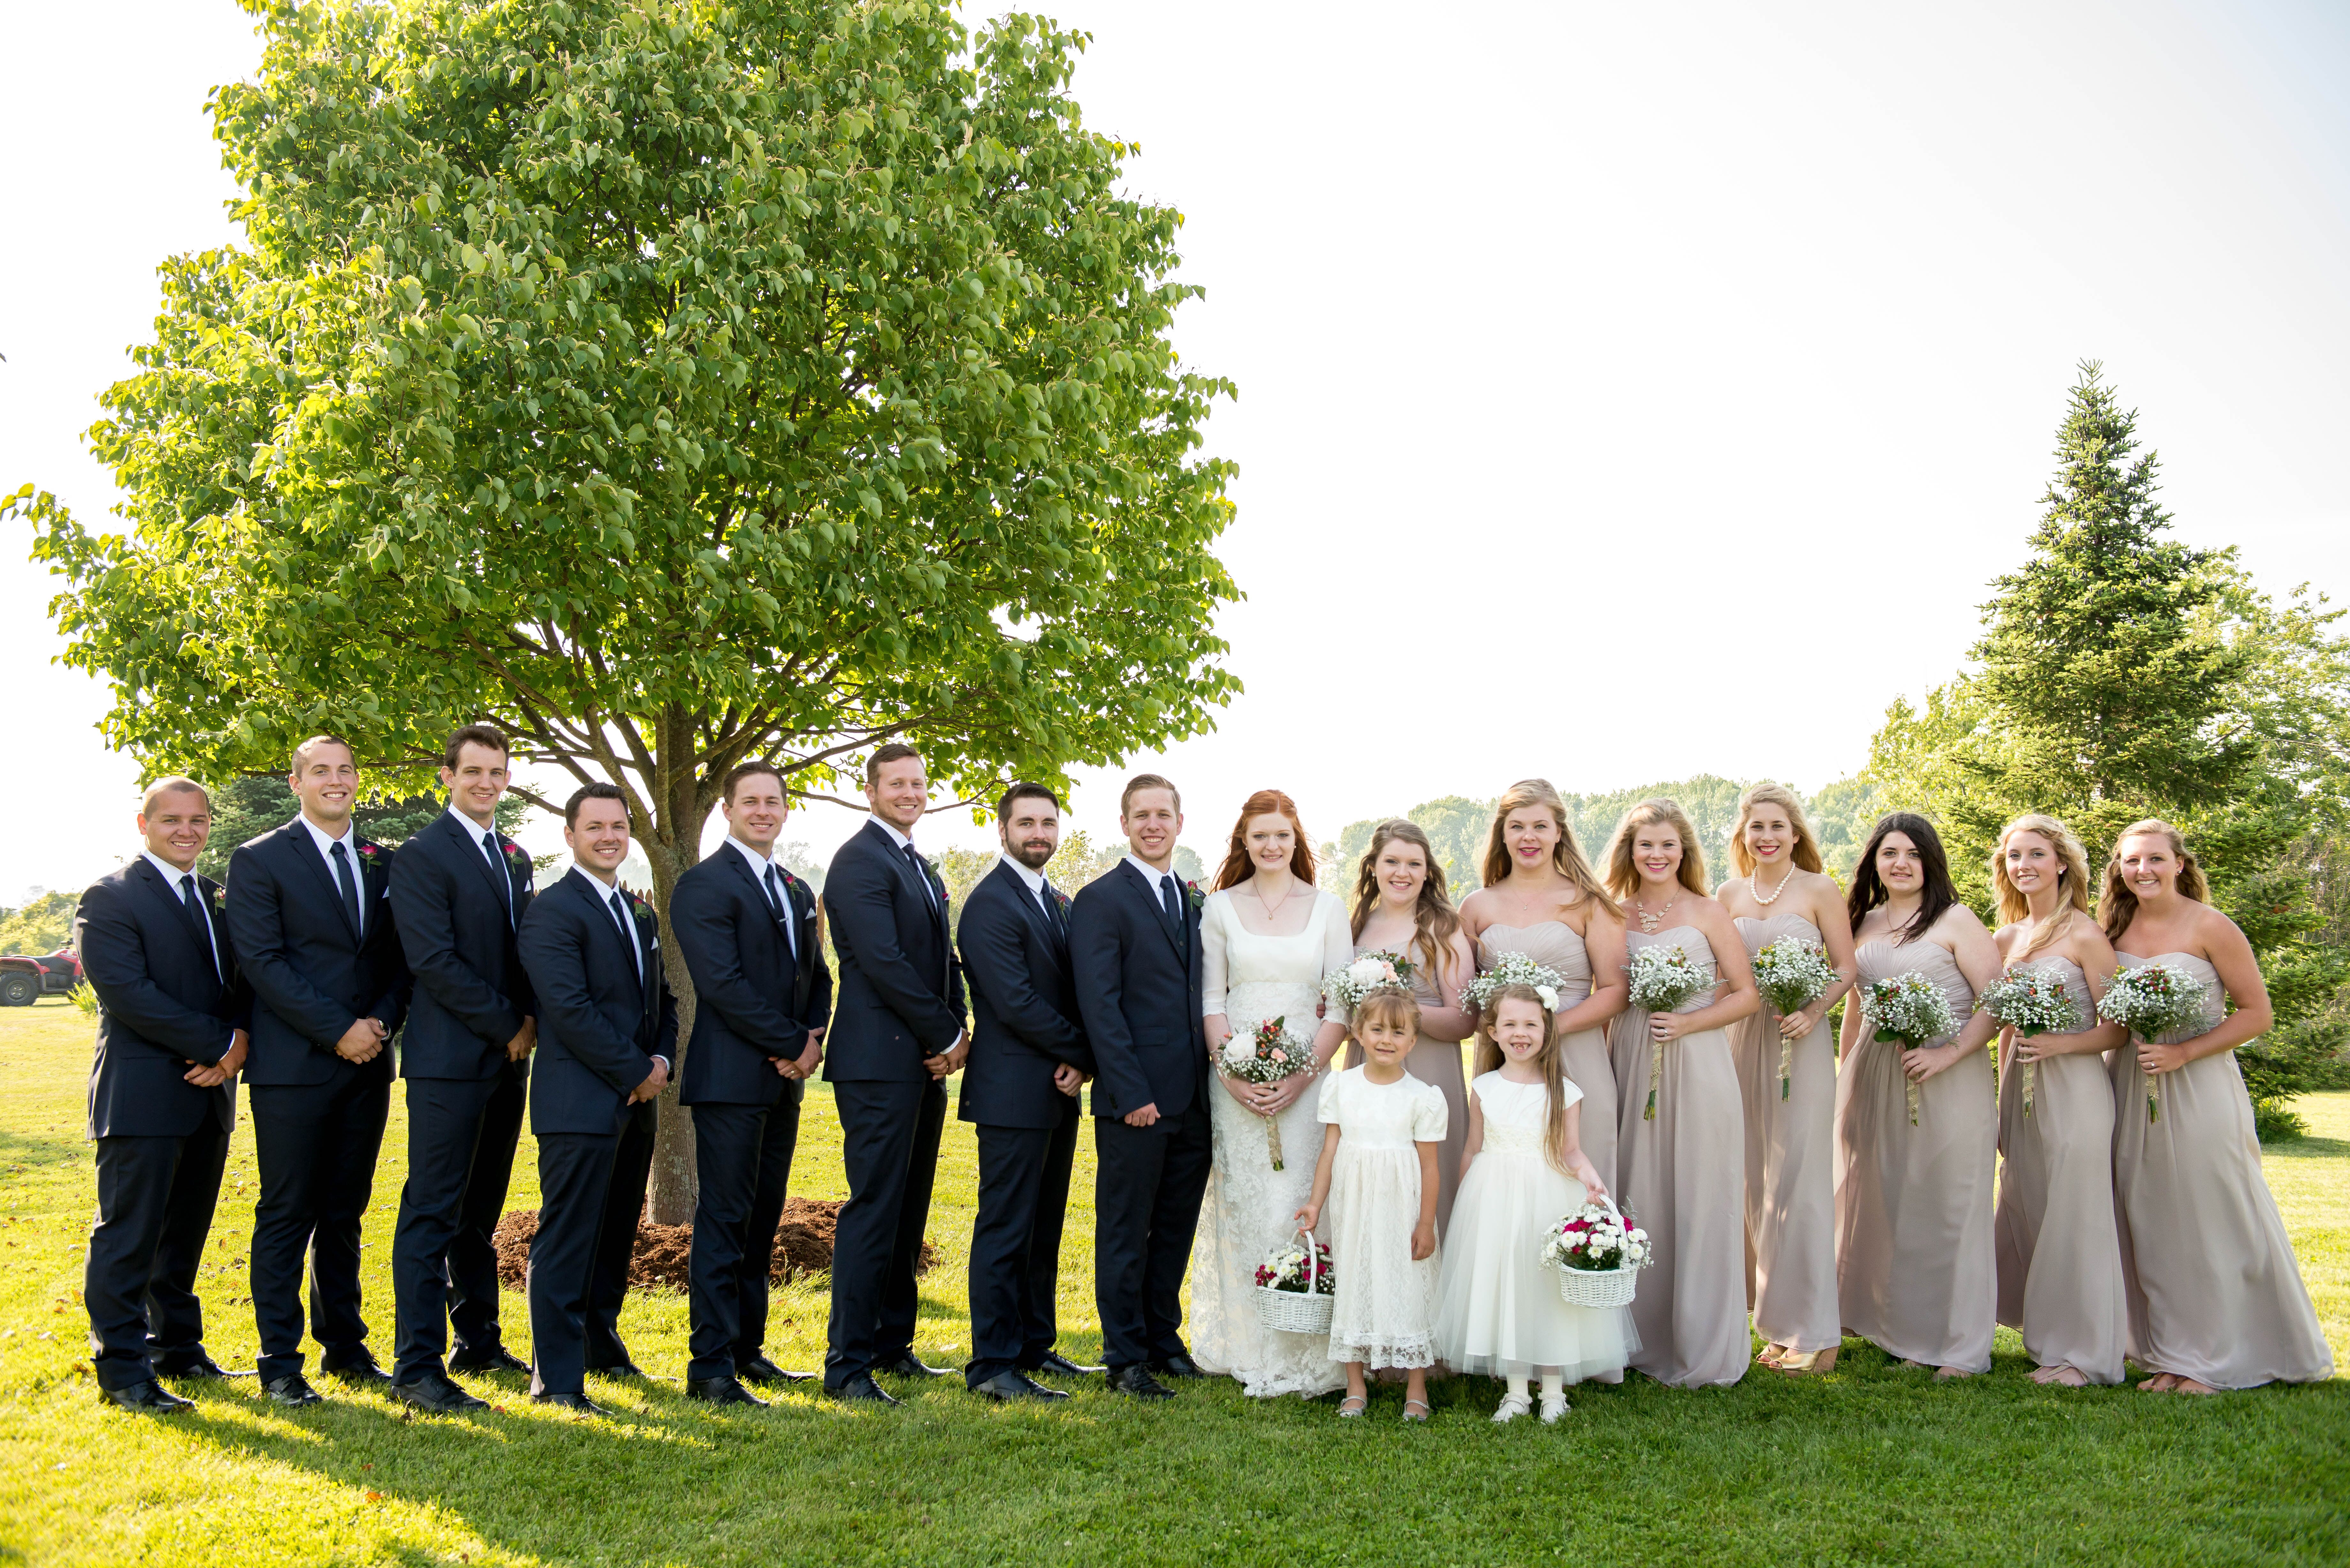 bridesmaid dresses and groomsmen suits